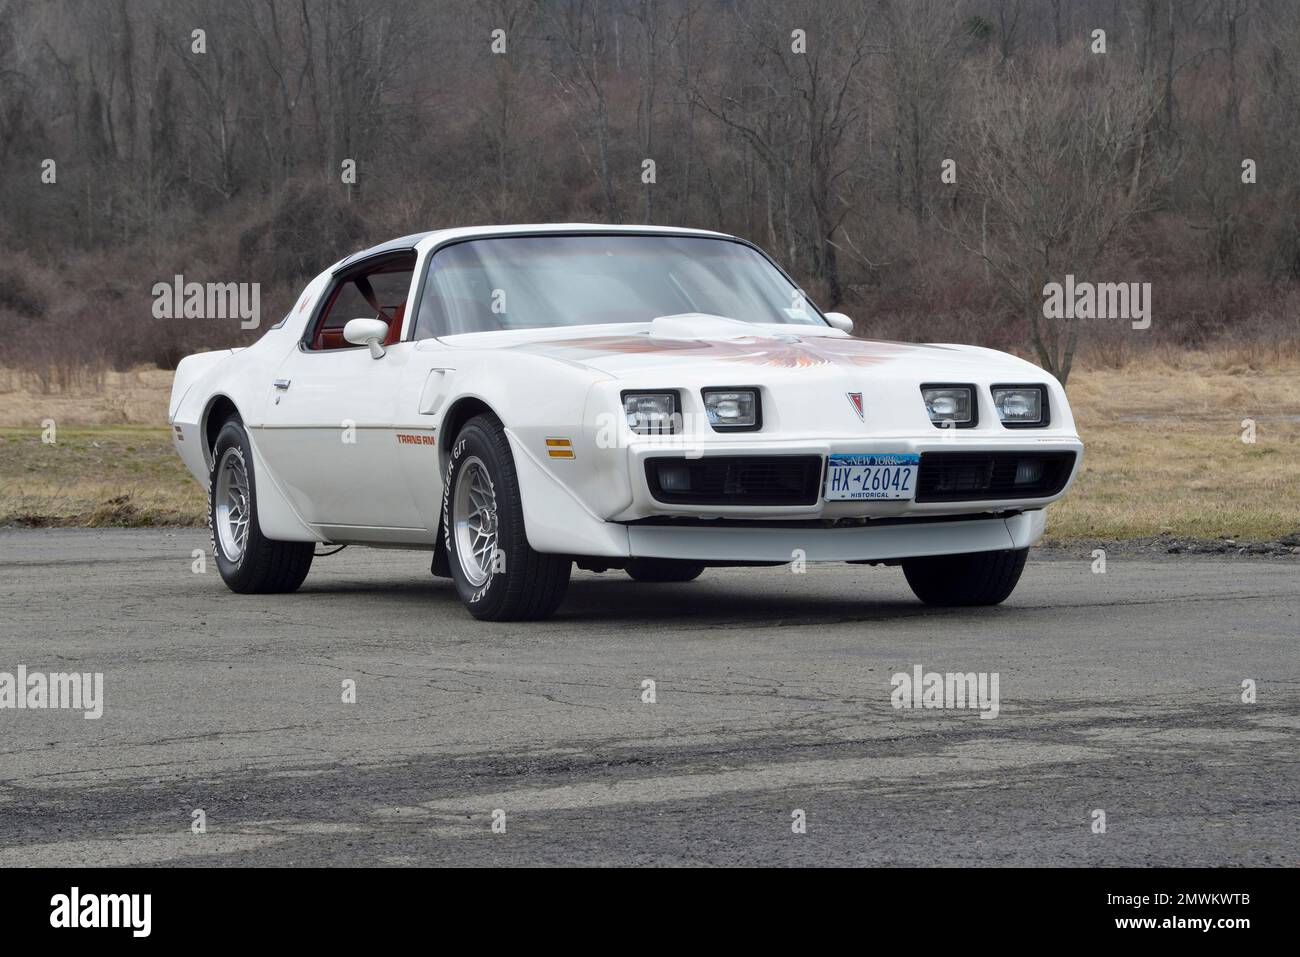 White 1979 Pontiac Trans Am in a three-quarter-front view against winter trees in soft light. Stock Photo